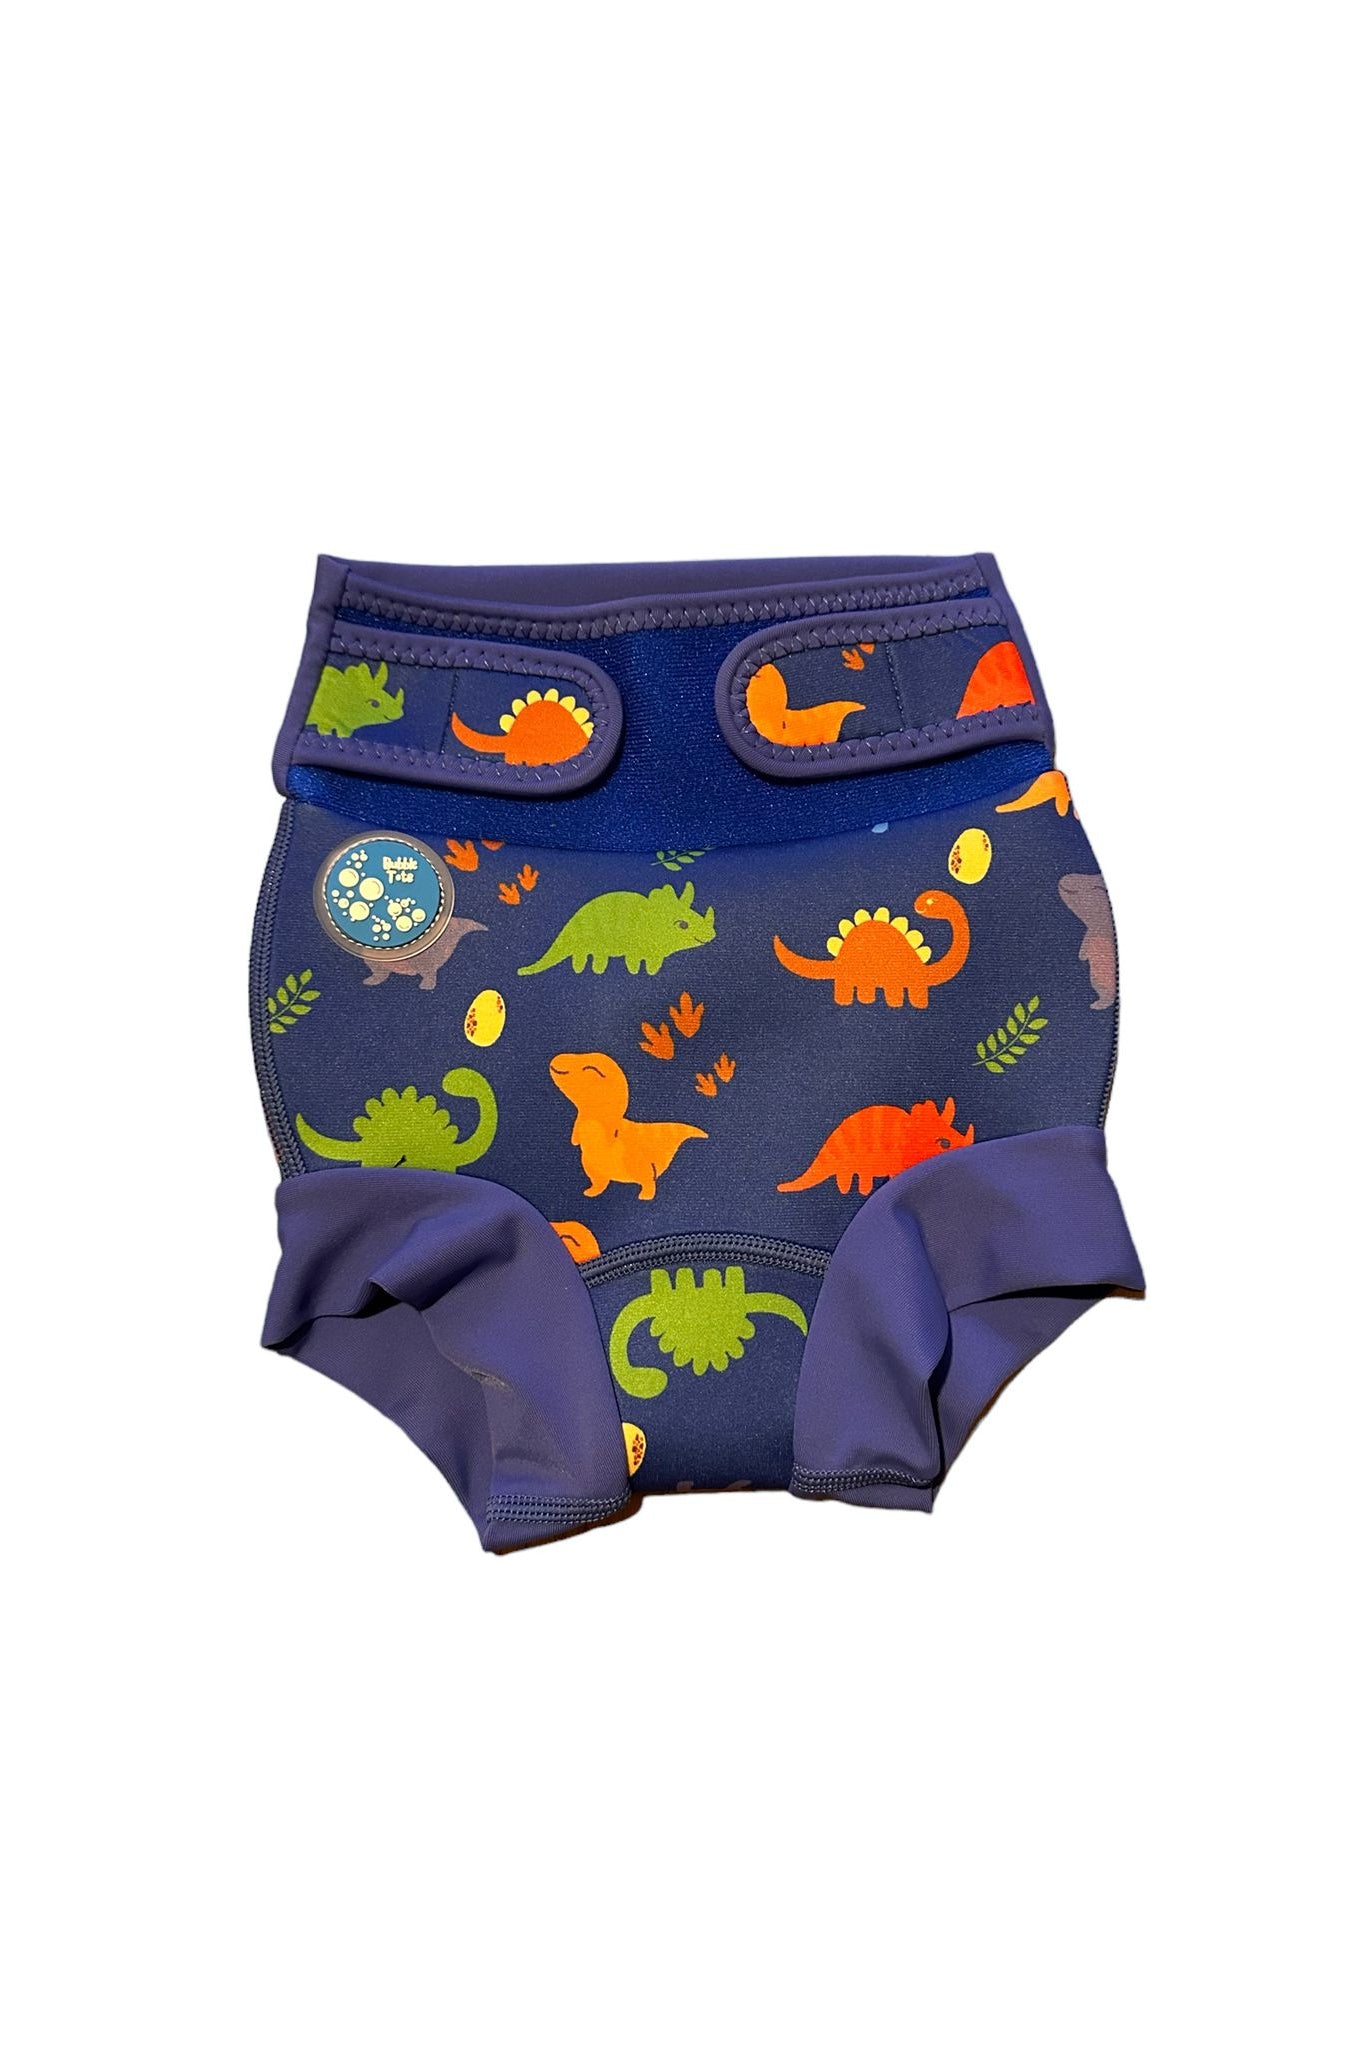 Bubble Tots Go Anywhere Swim Nappy Blue Dinosaurs Design An image of the Bubble Tots Go Anywhere Swim Nappy in Blue Dinosaurs design. The design features playful Dinosaurs, Eggs and Prints. 